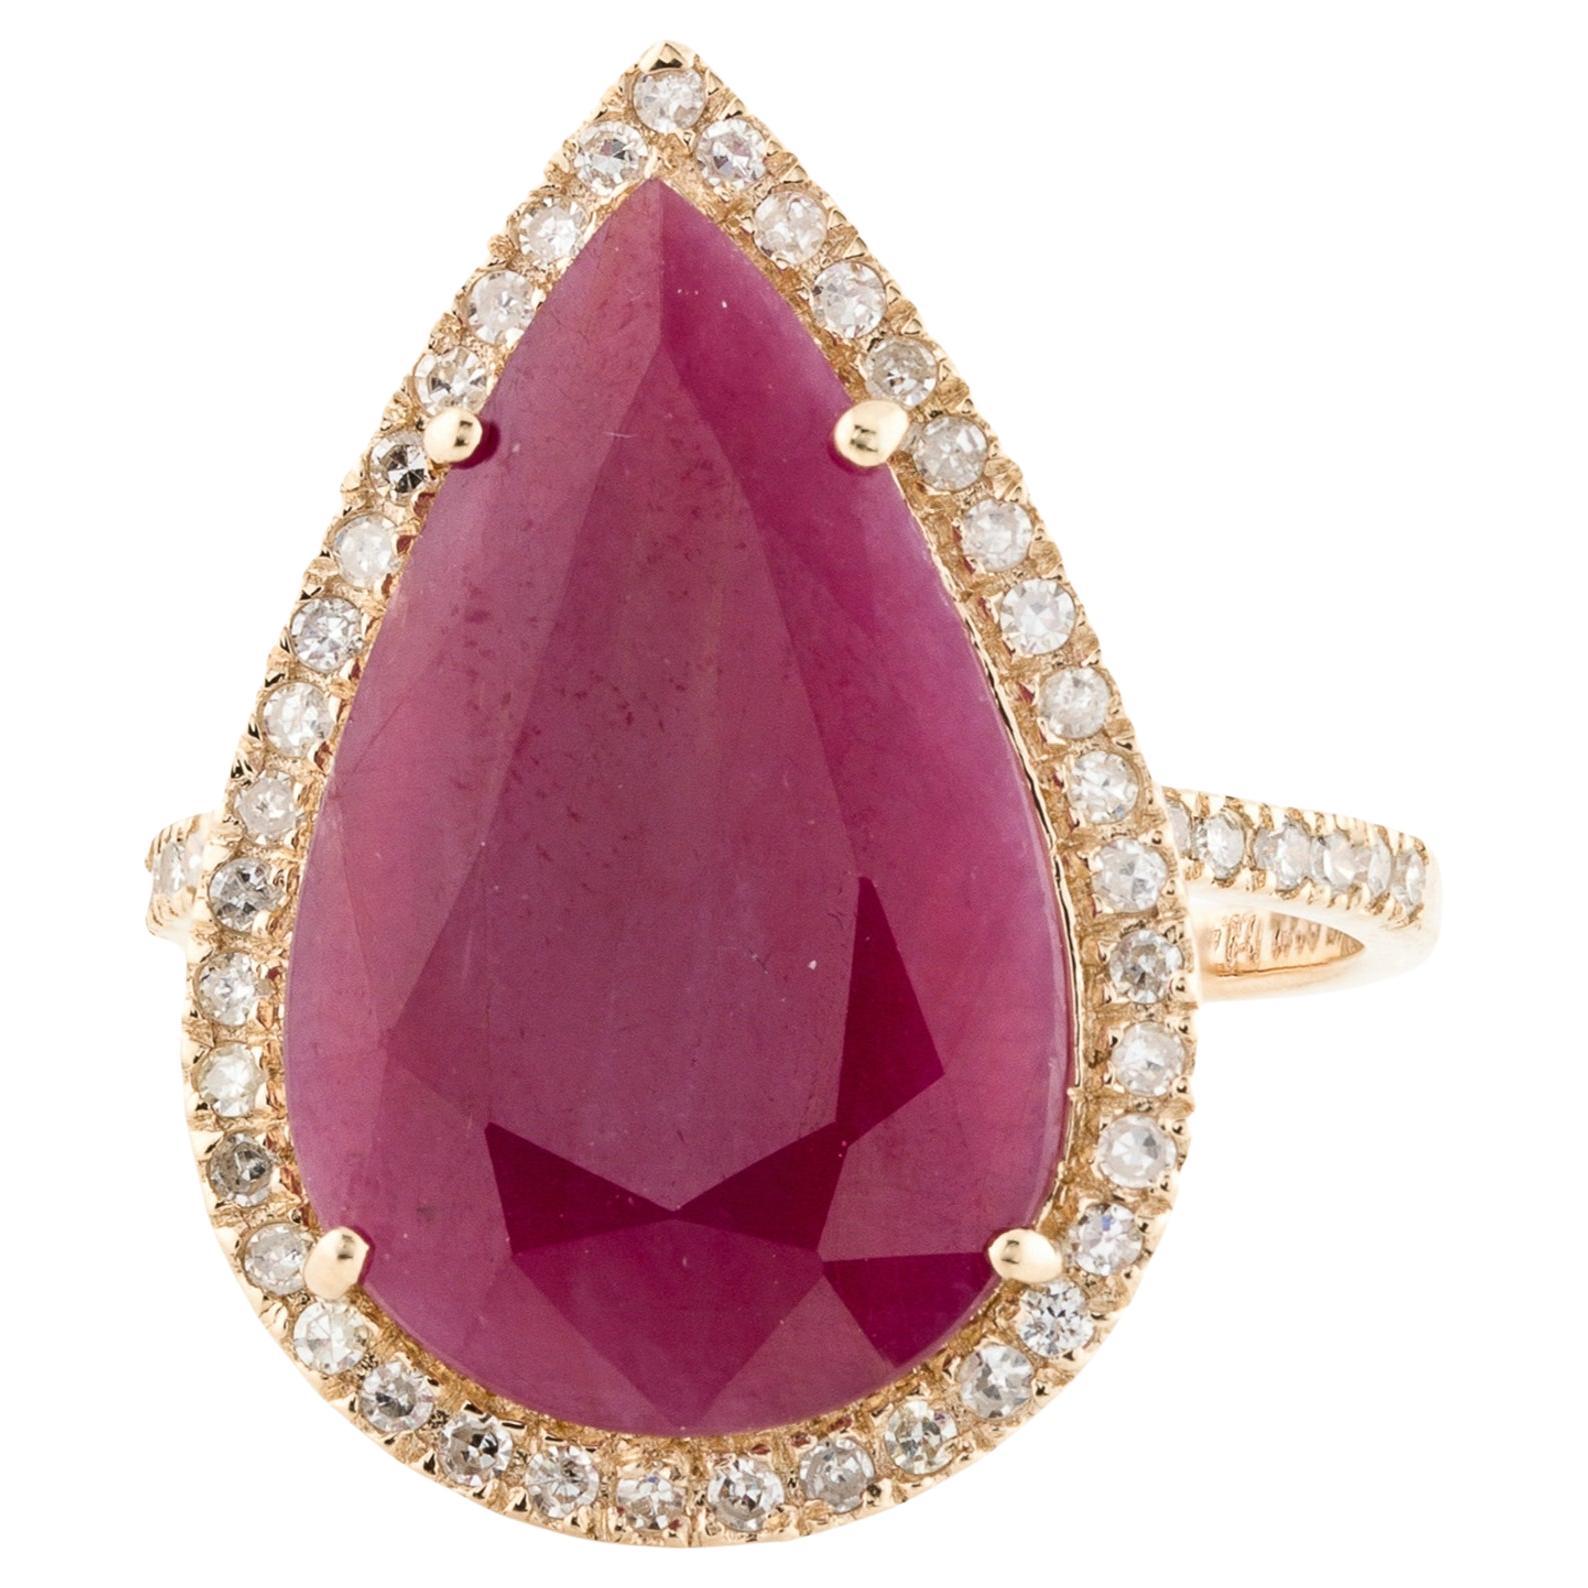 Dazzling 14K Gold 6.16ct Ruby & Diamond Cocktail Ring - Size 7.5 - Fine Jewelry For Sale